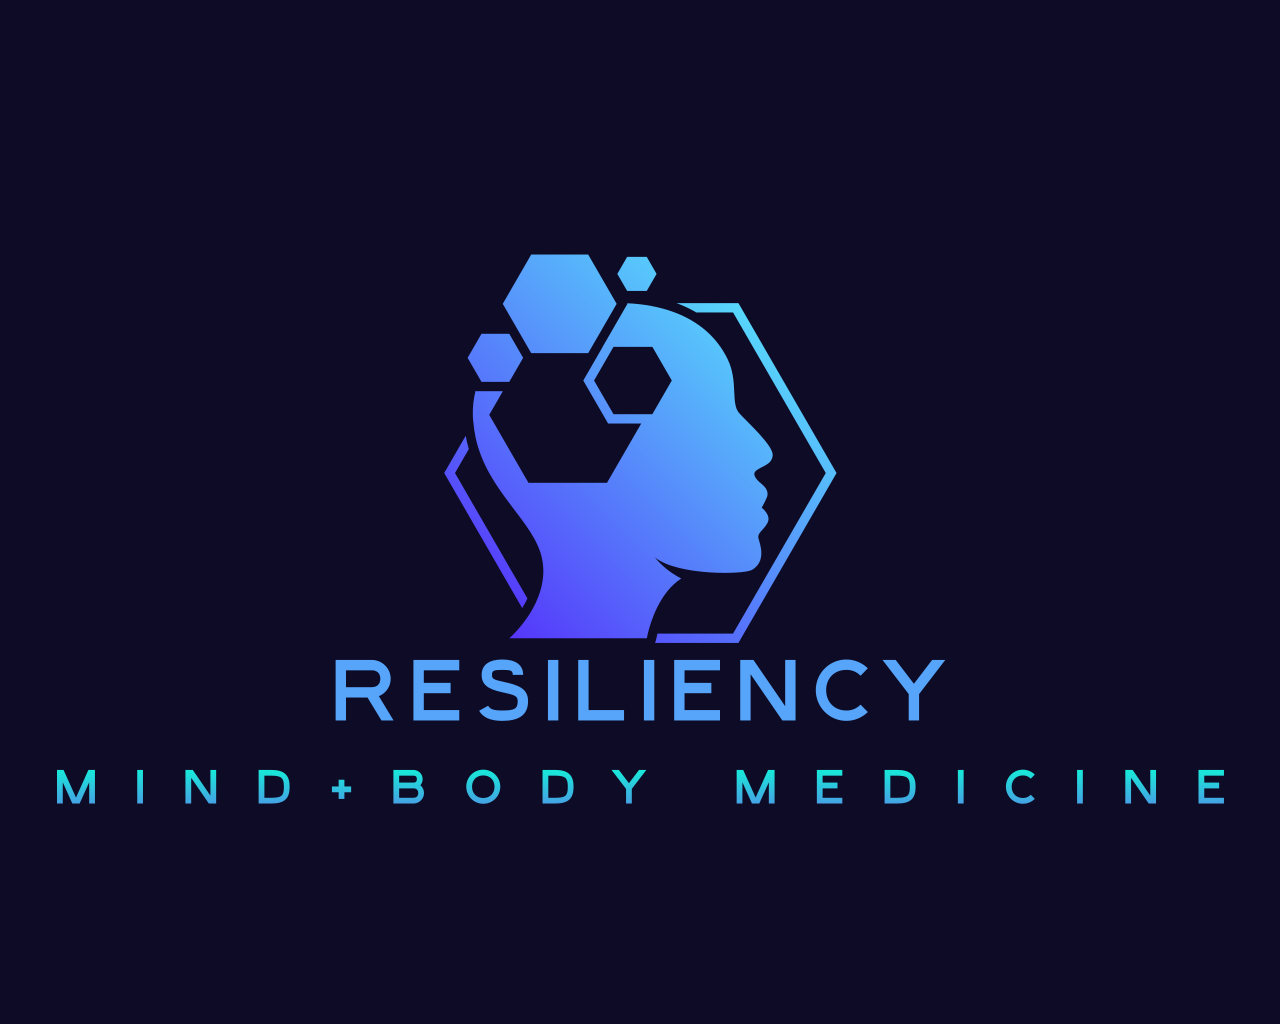 Resiliency Mind+Body Medicine Celebrates the Opening of their Transformative Integrative Psychiatry Clinic